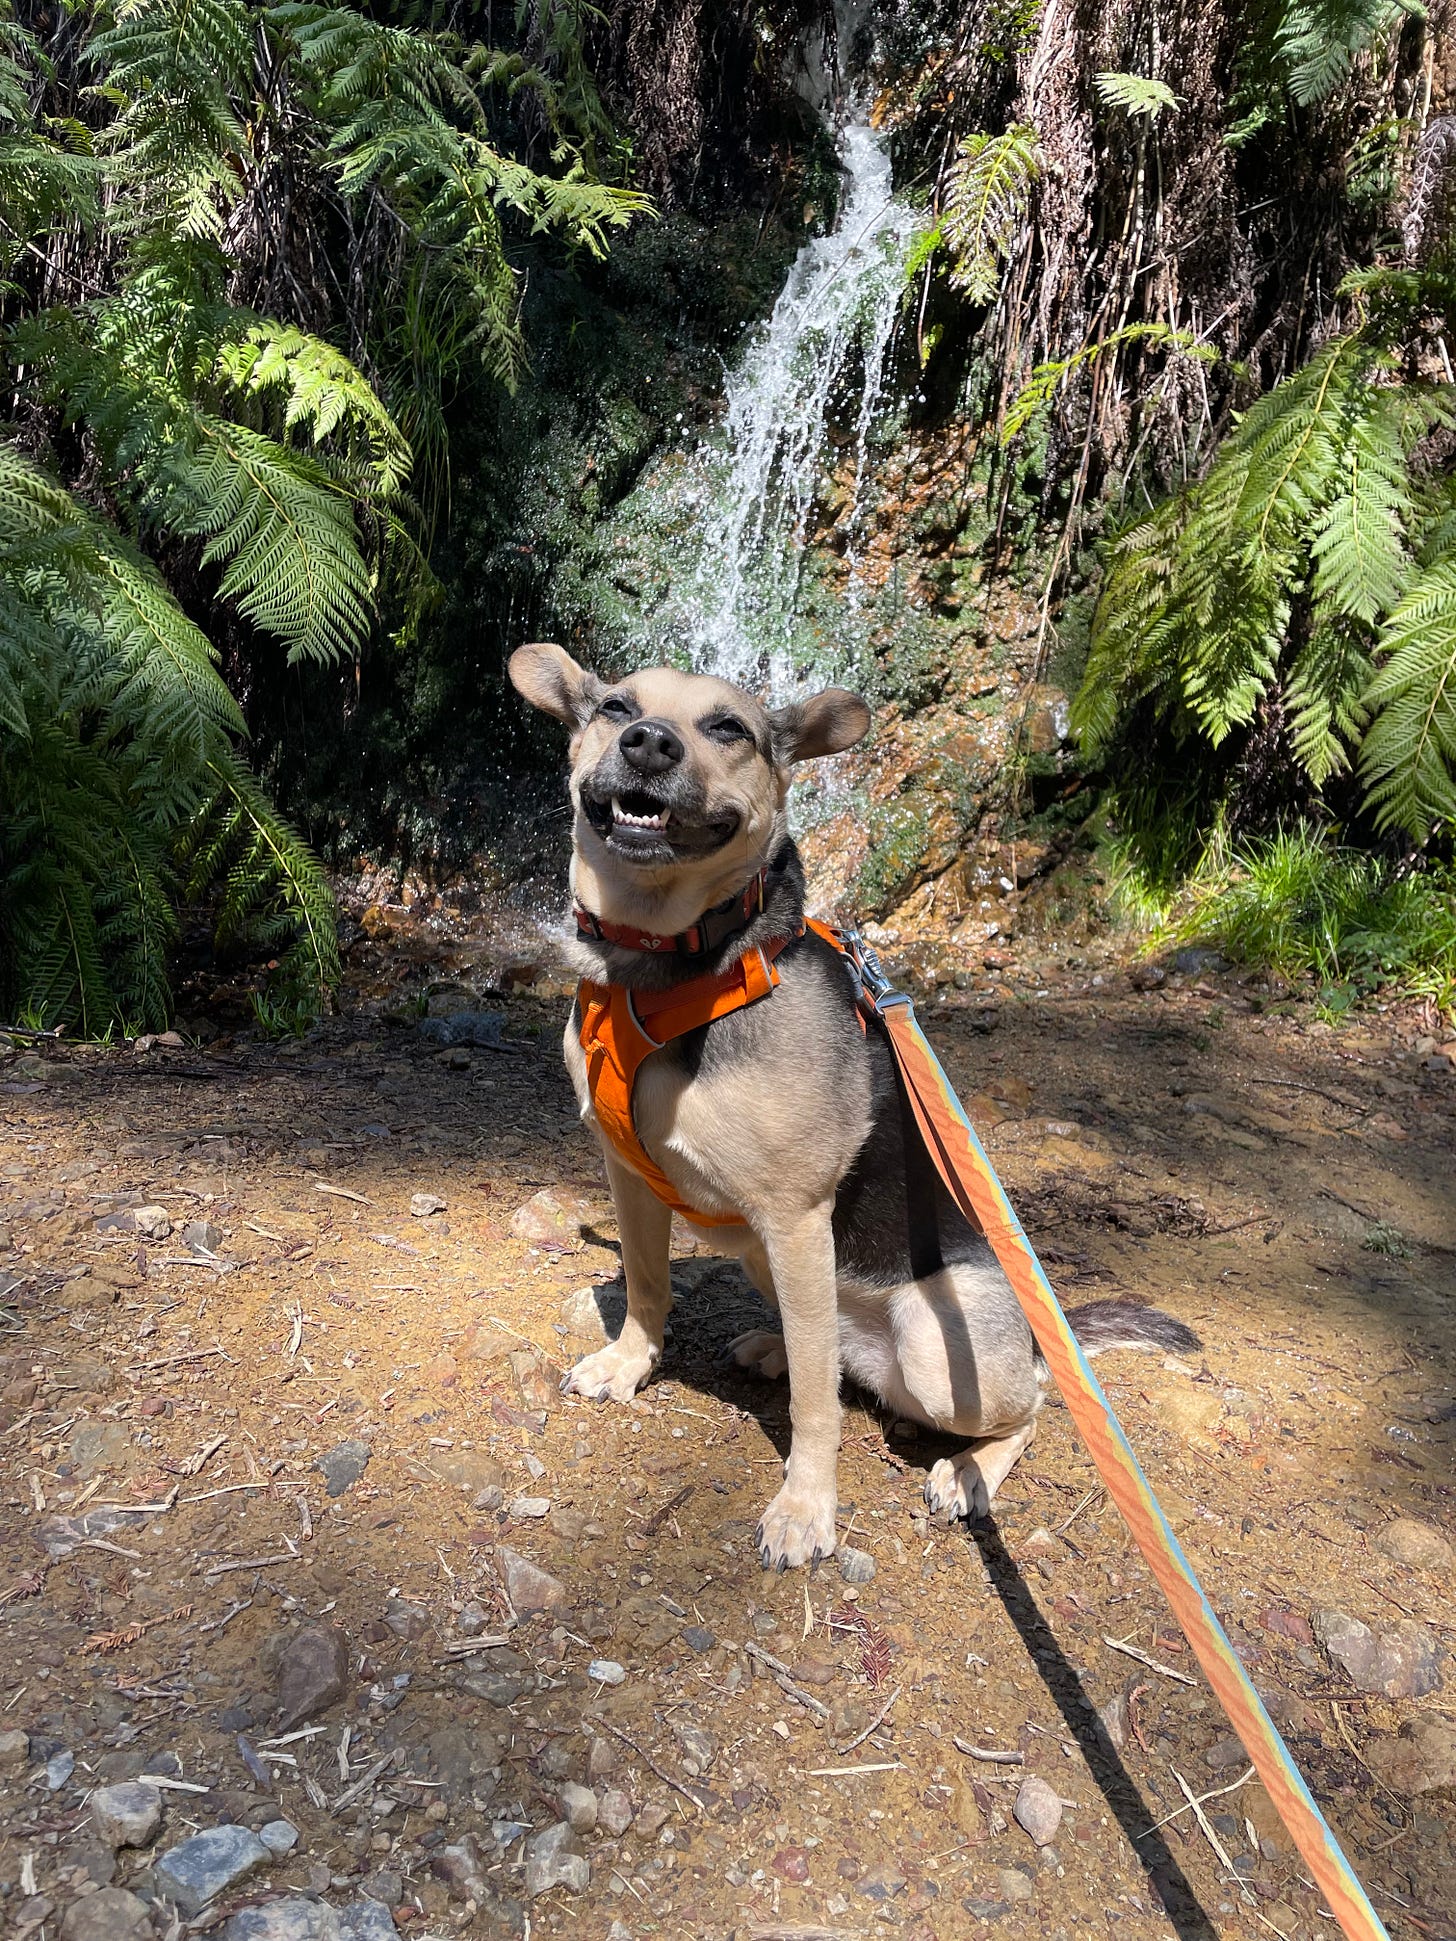 brown and black dog with ears sticking out wearing an orange harness and leash in front of a small waterfall